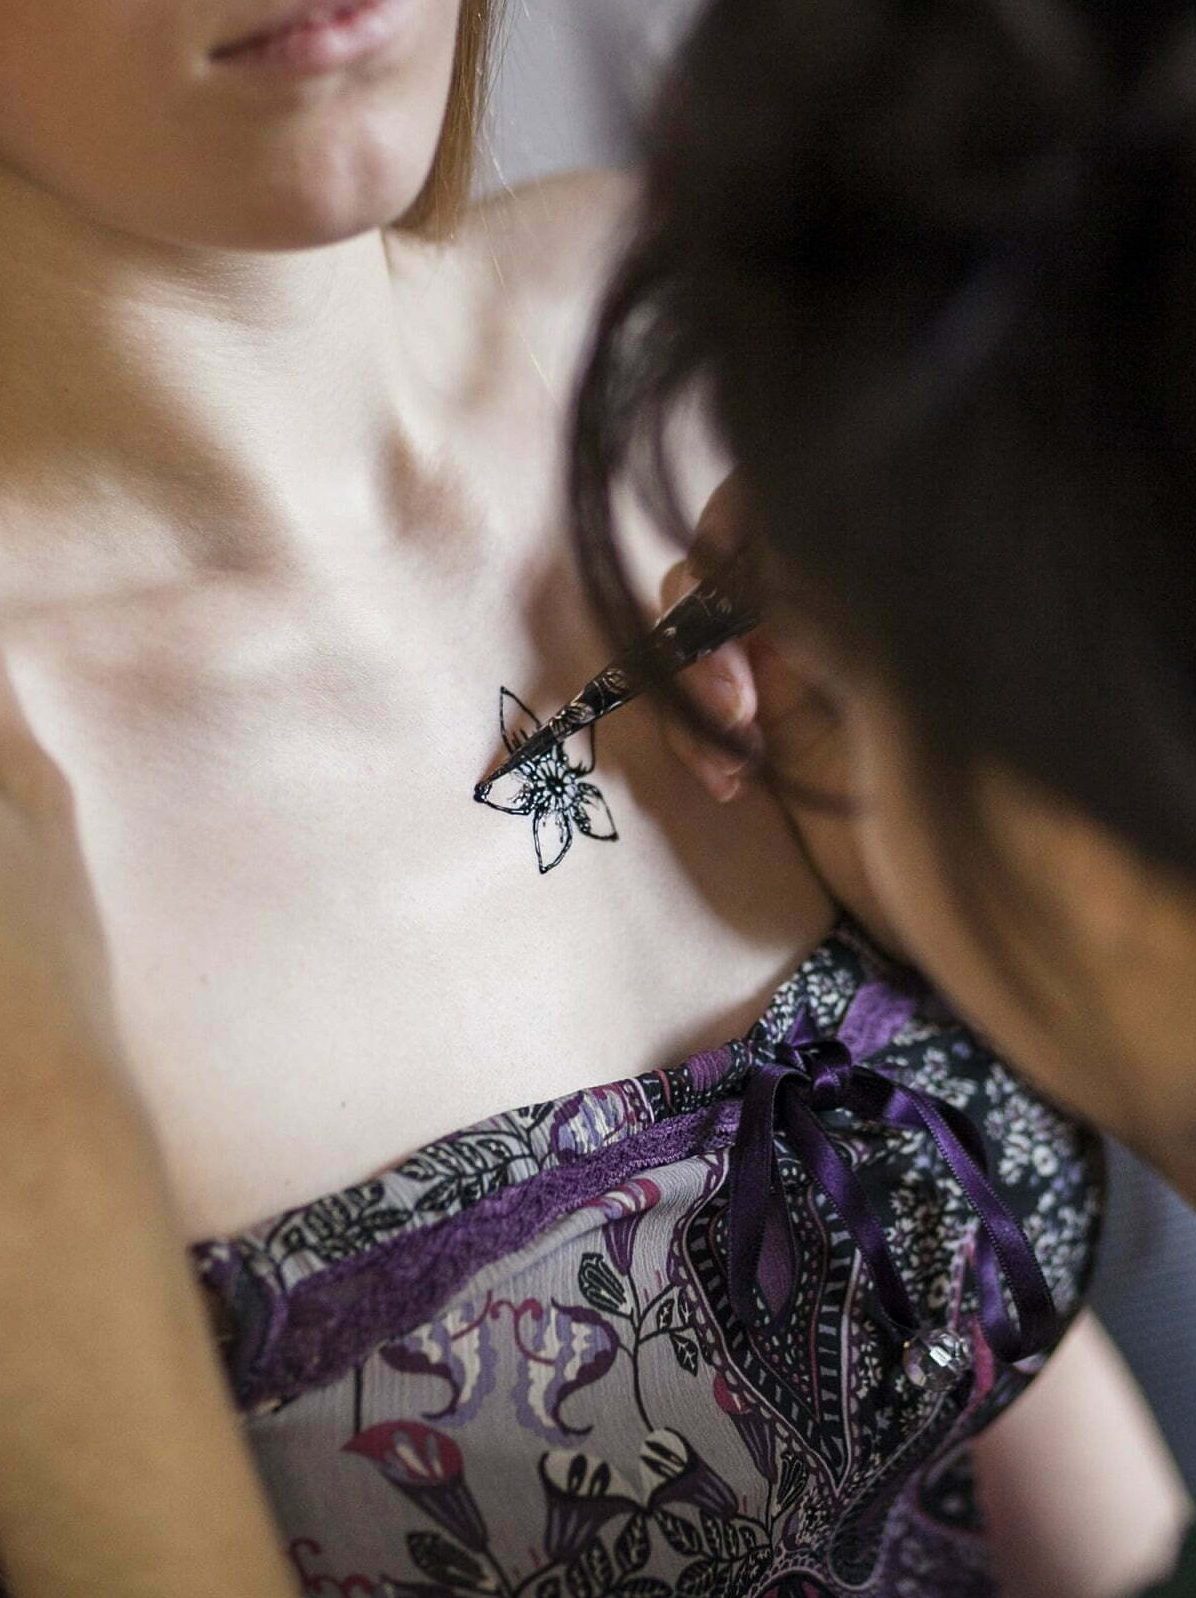 Woman having henna tattoo done on her chest